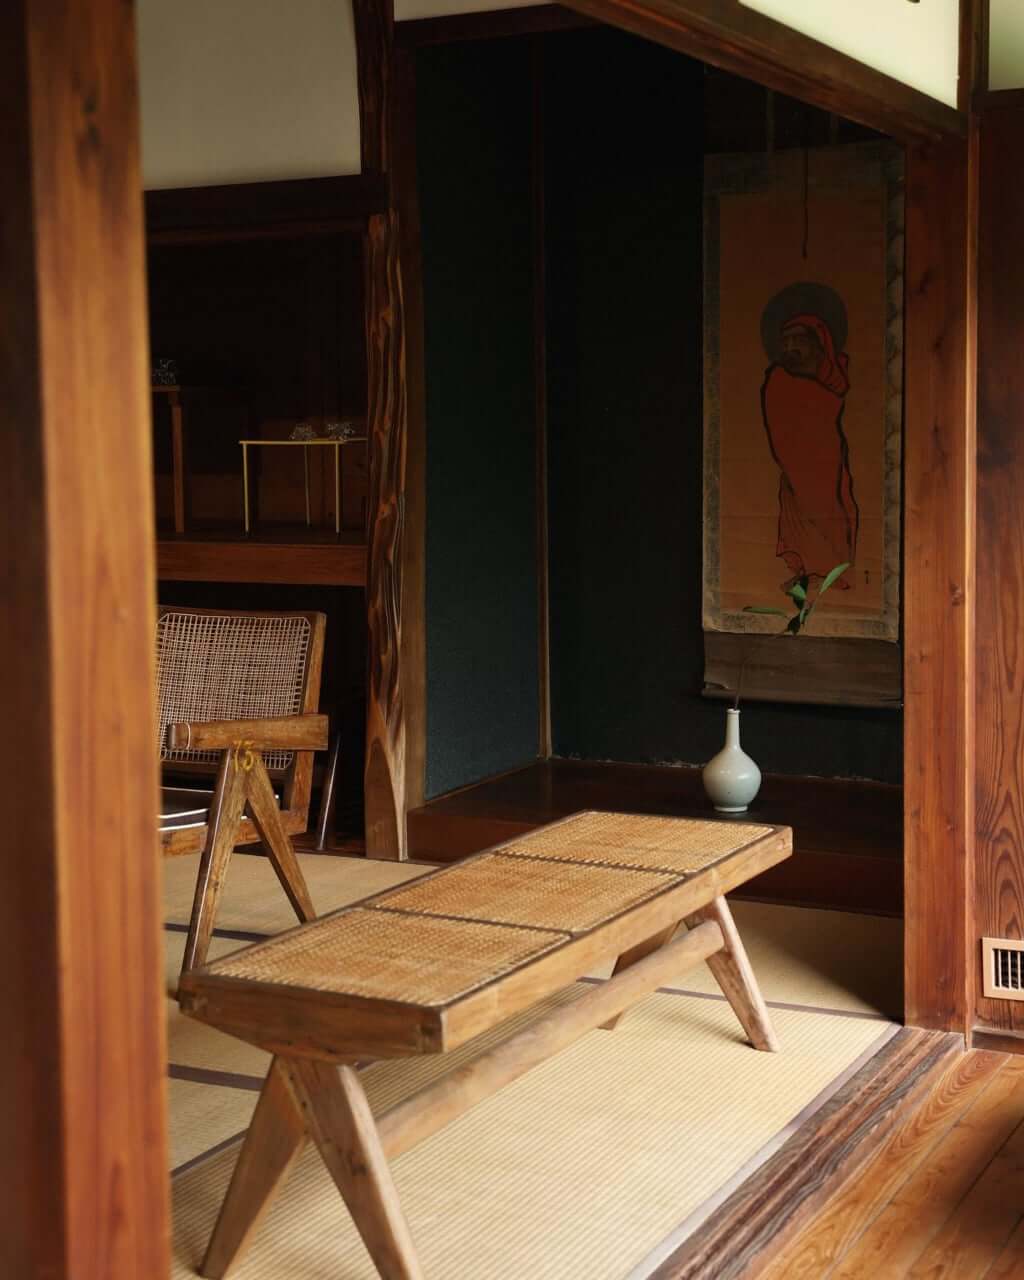 The Finest 1950s French Furniture Showcased in a 'Kominka' in 